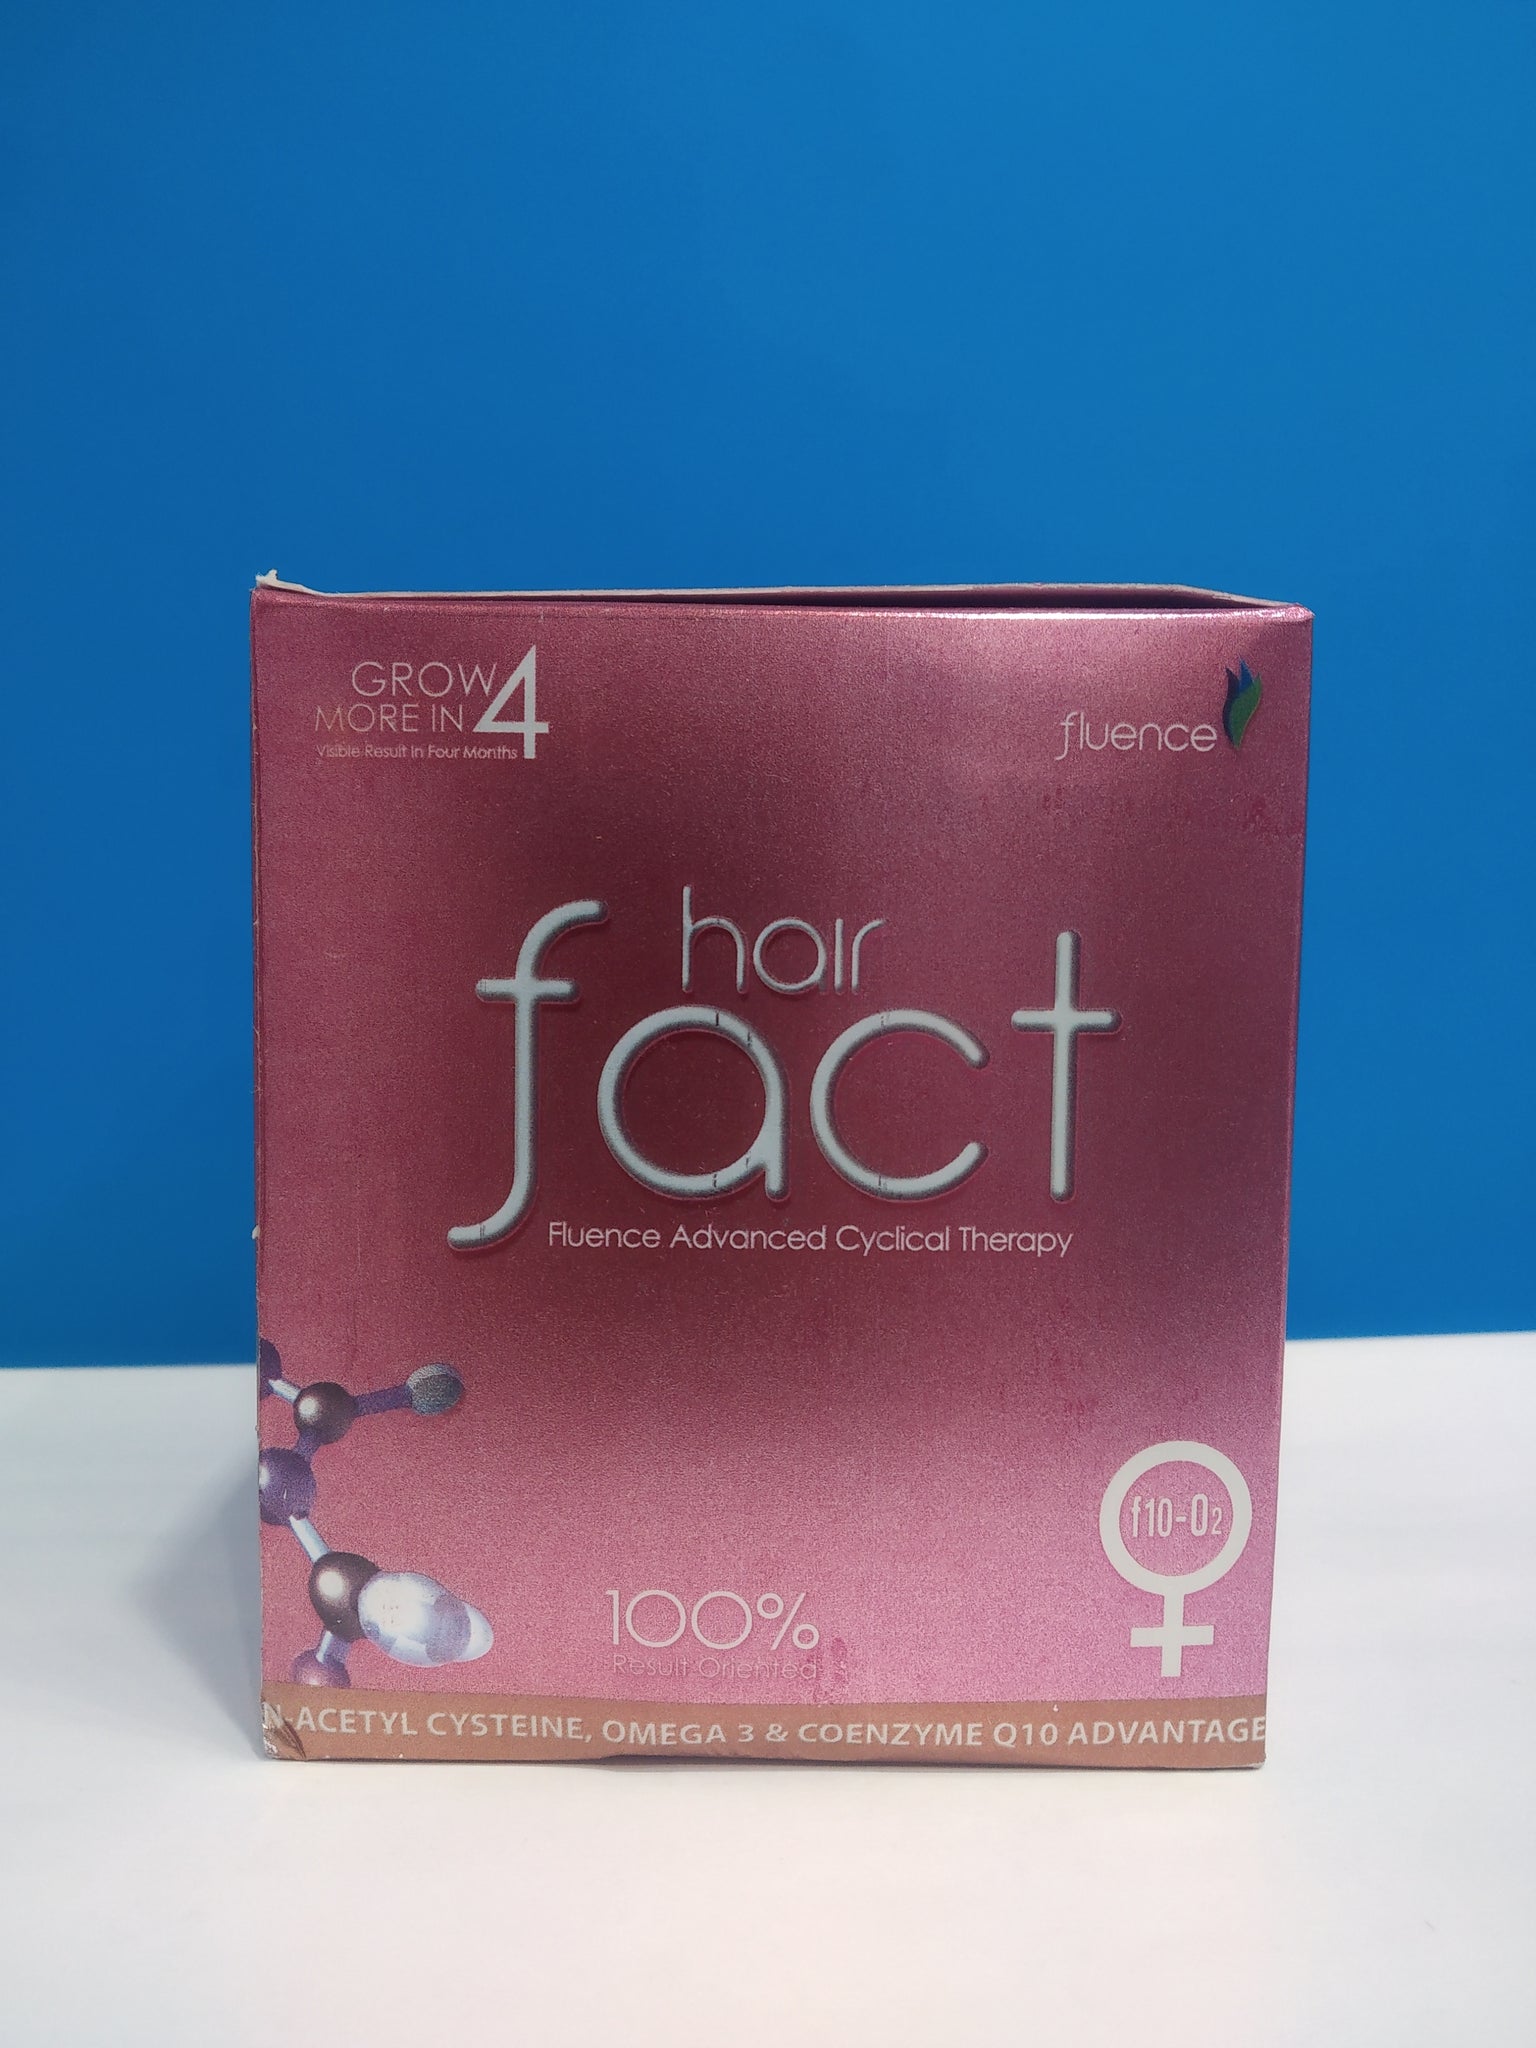 Discover more than 126 hair fact m1 super hot